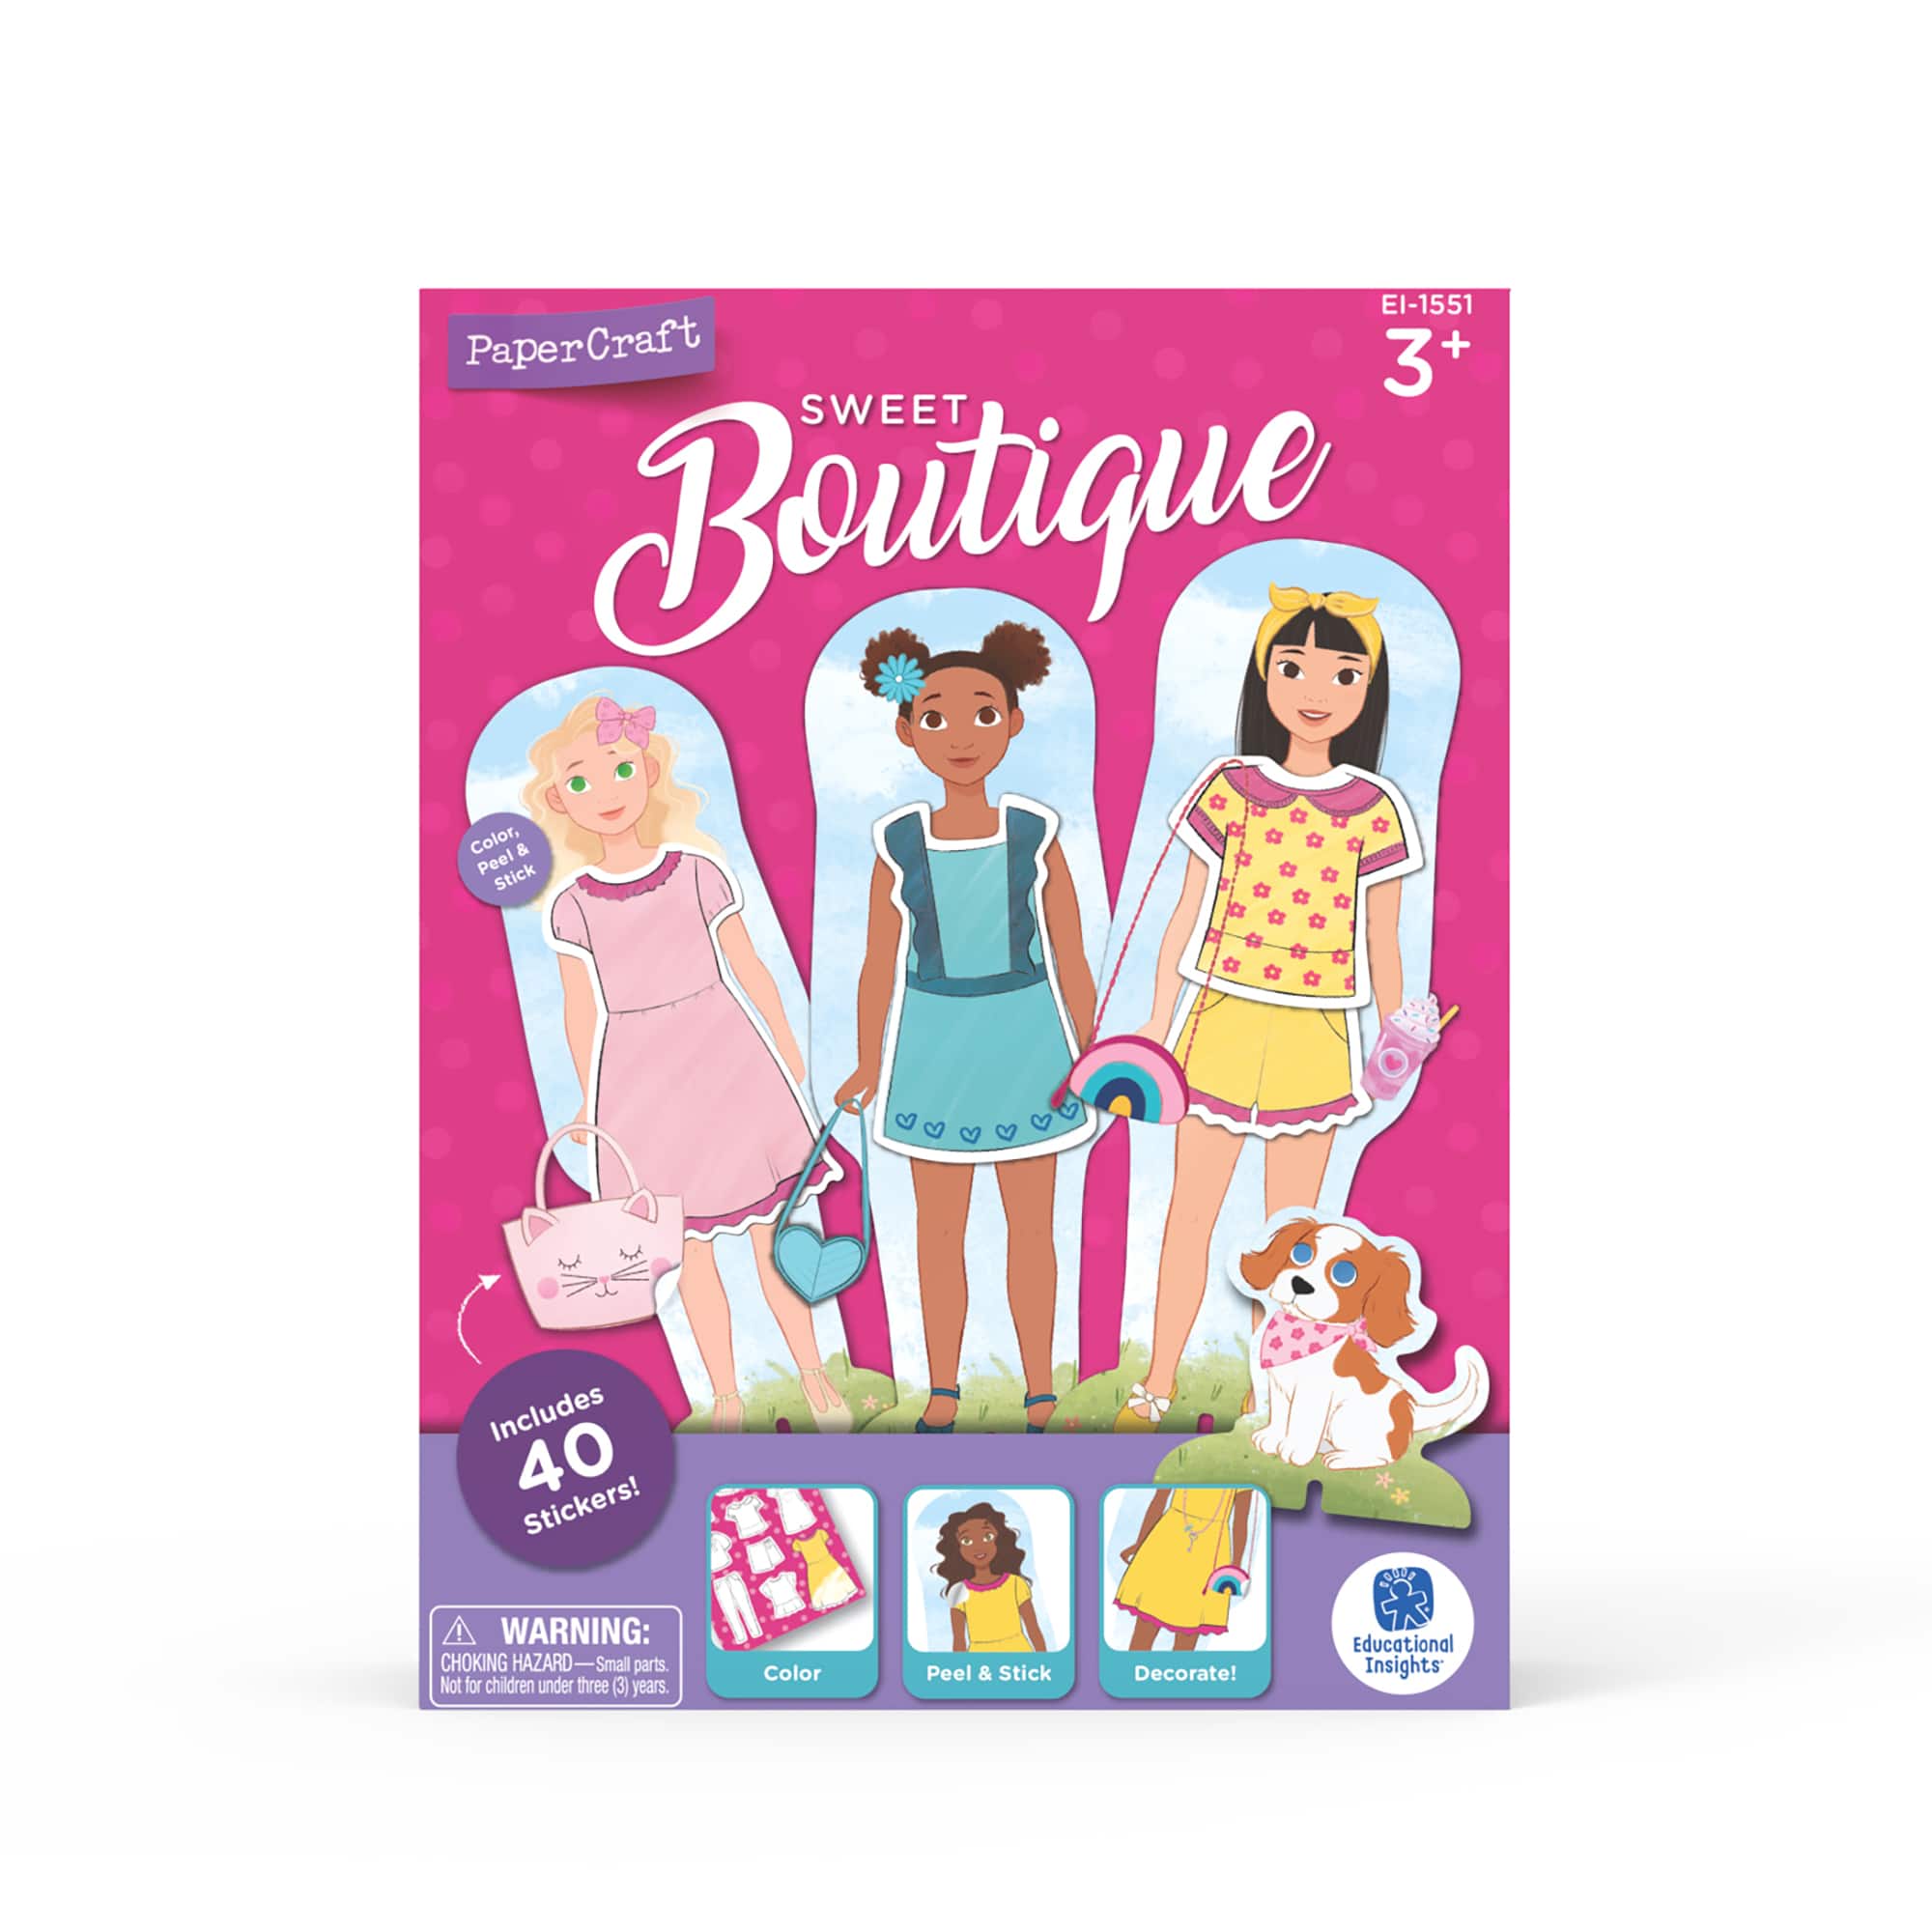 Educational Insights PaperCraft Sweet Boutique